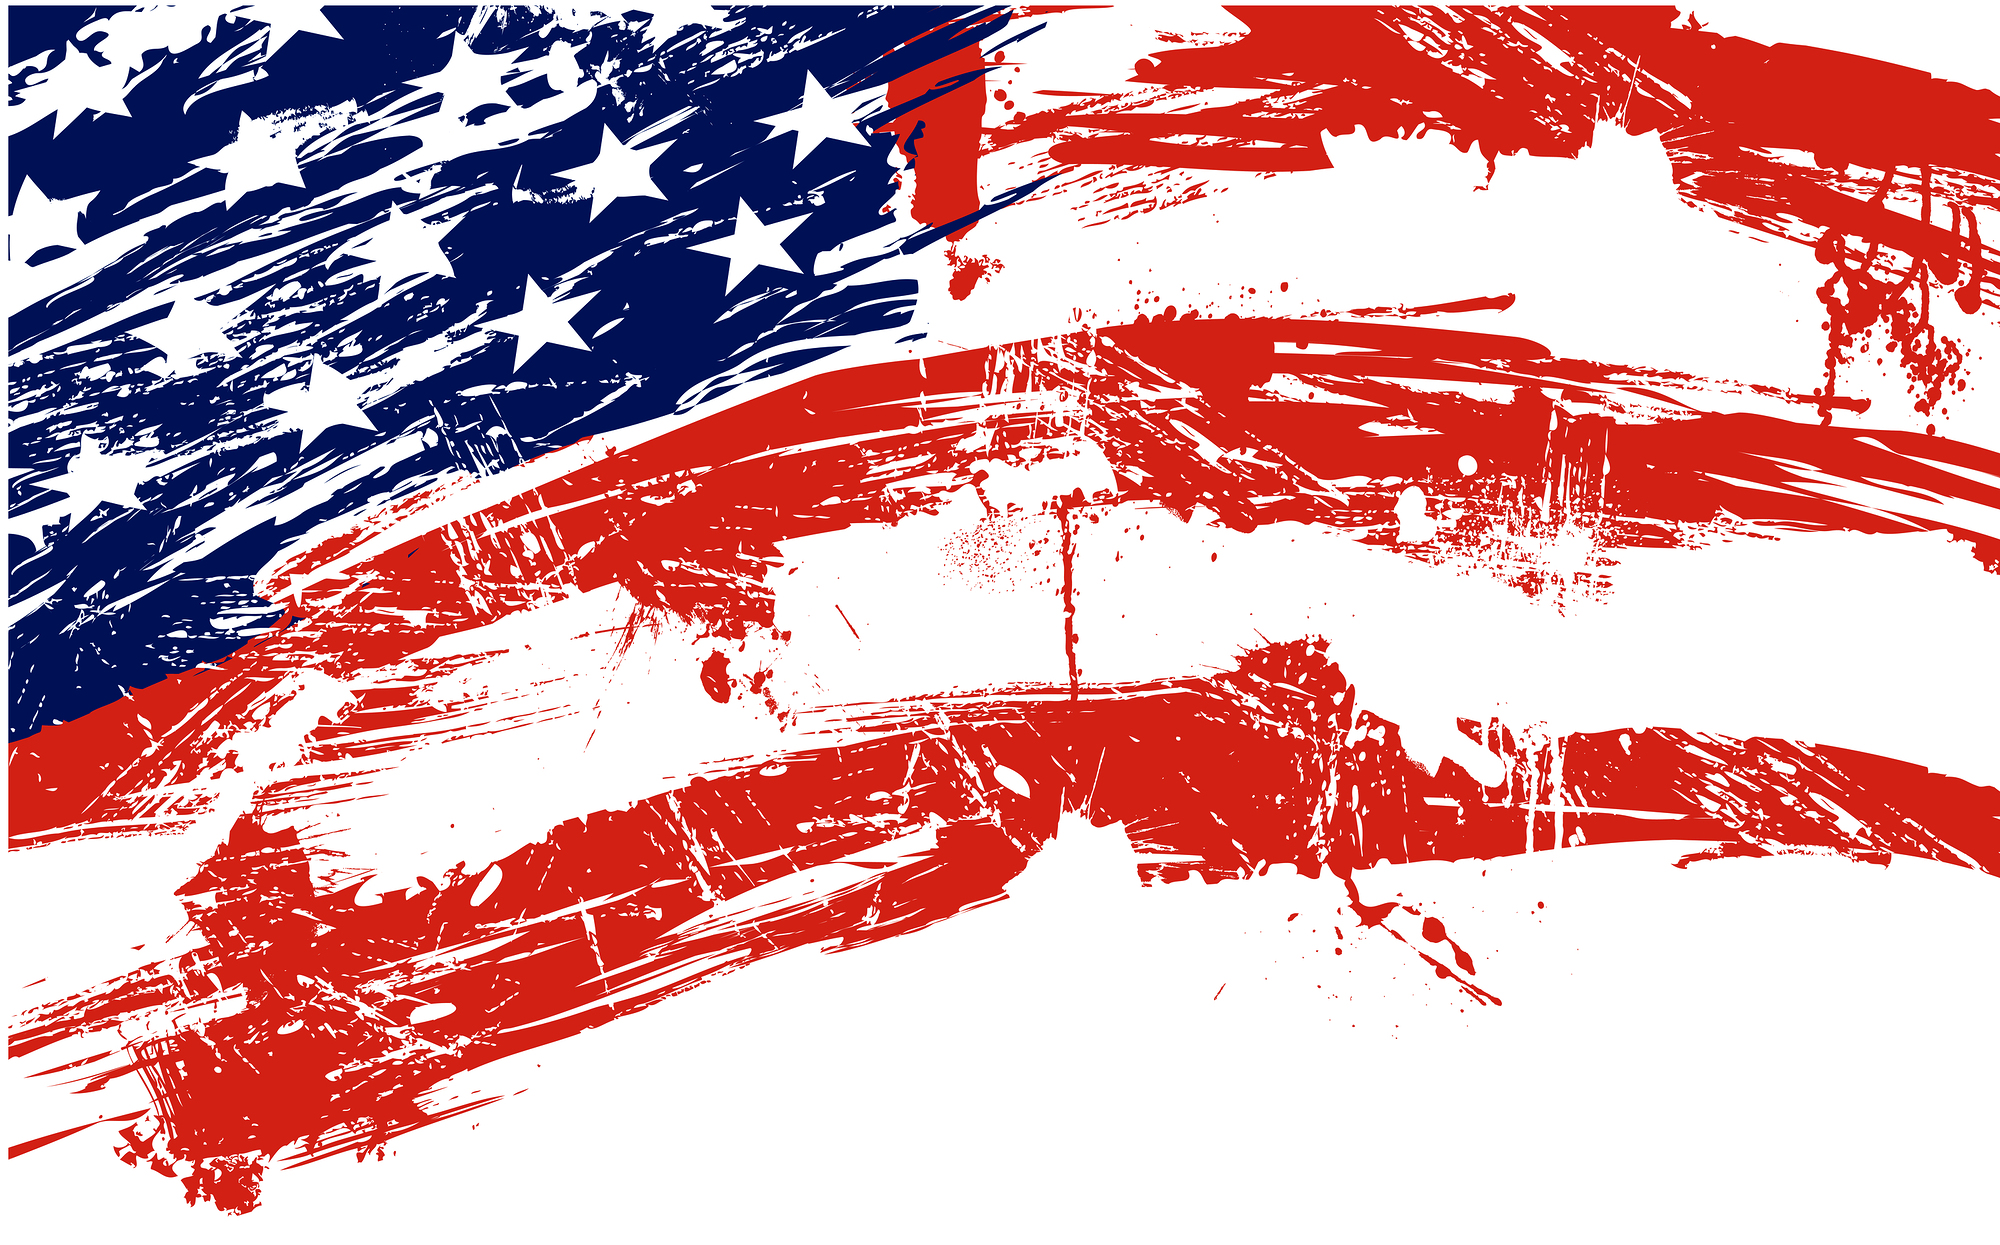 American flag background fully editable vector illustration can be scaled to any size without quality loss